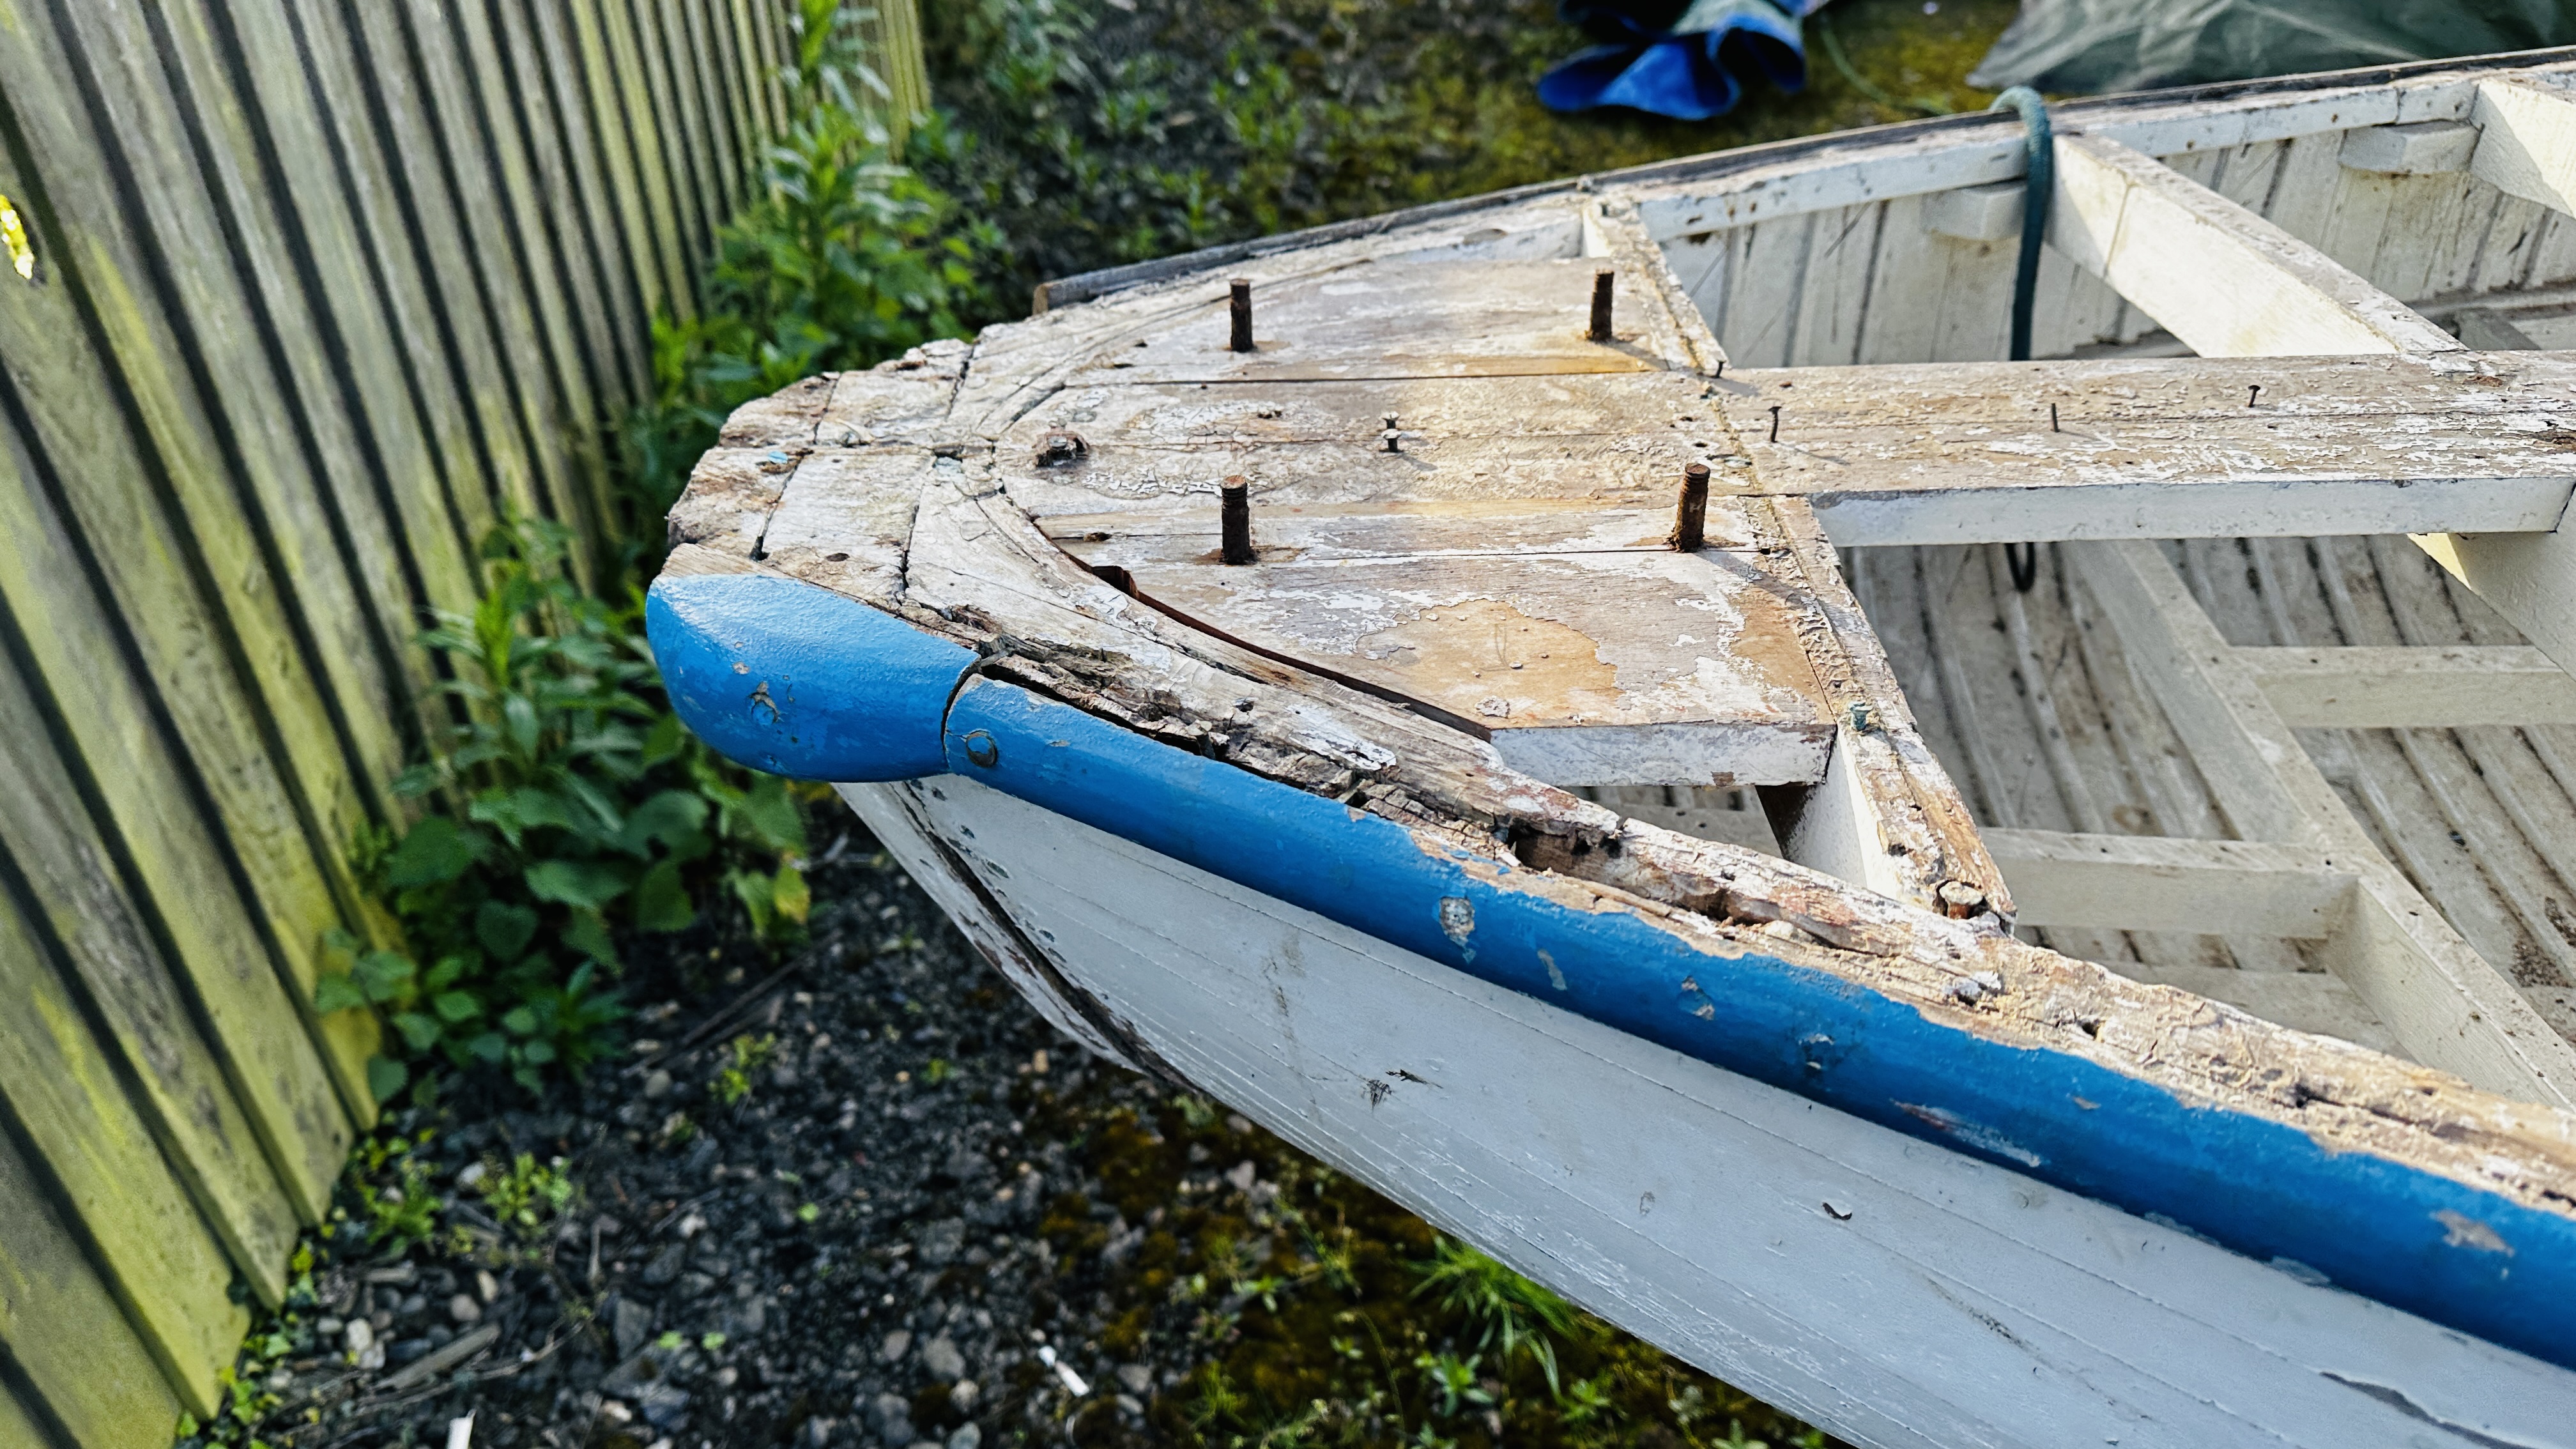 A WW2 UFFA FOX RESCUE BOAT BELIEVED TO BE BUILT BY TAYLOR WOODROW, STAMPED AW11, 1 OF 402 MADE, - Image 11 of 56